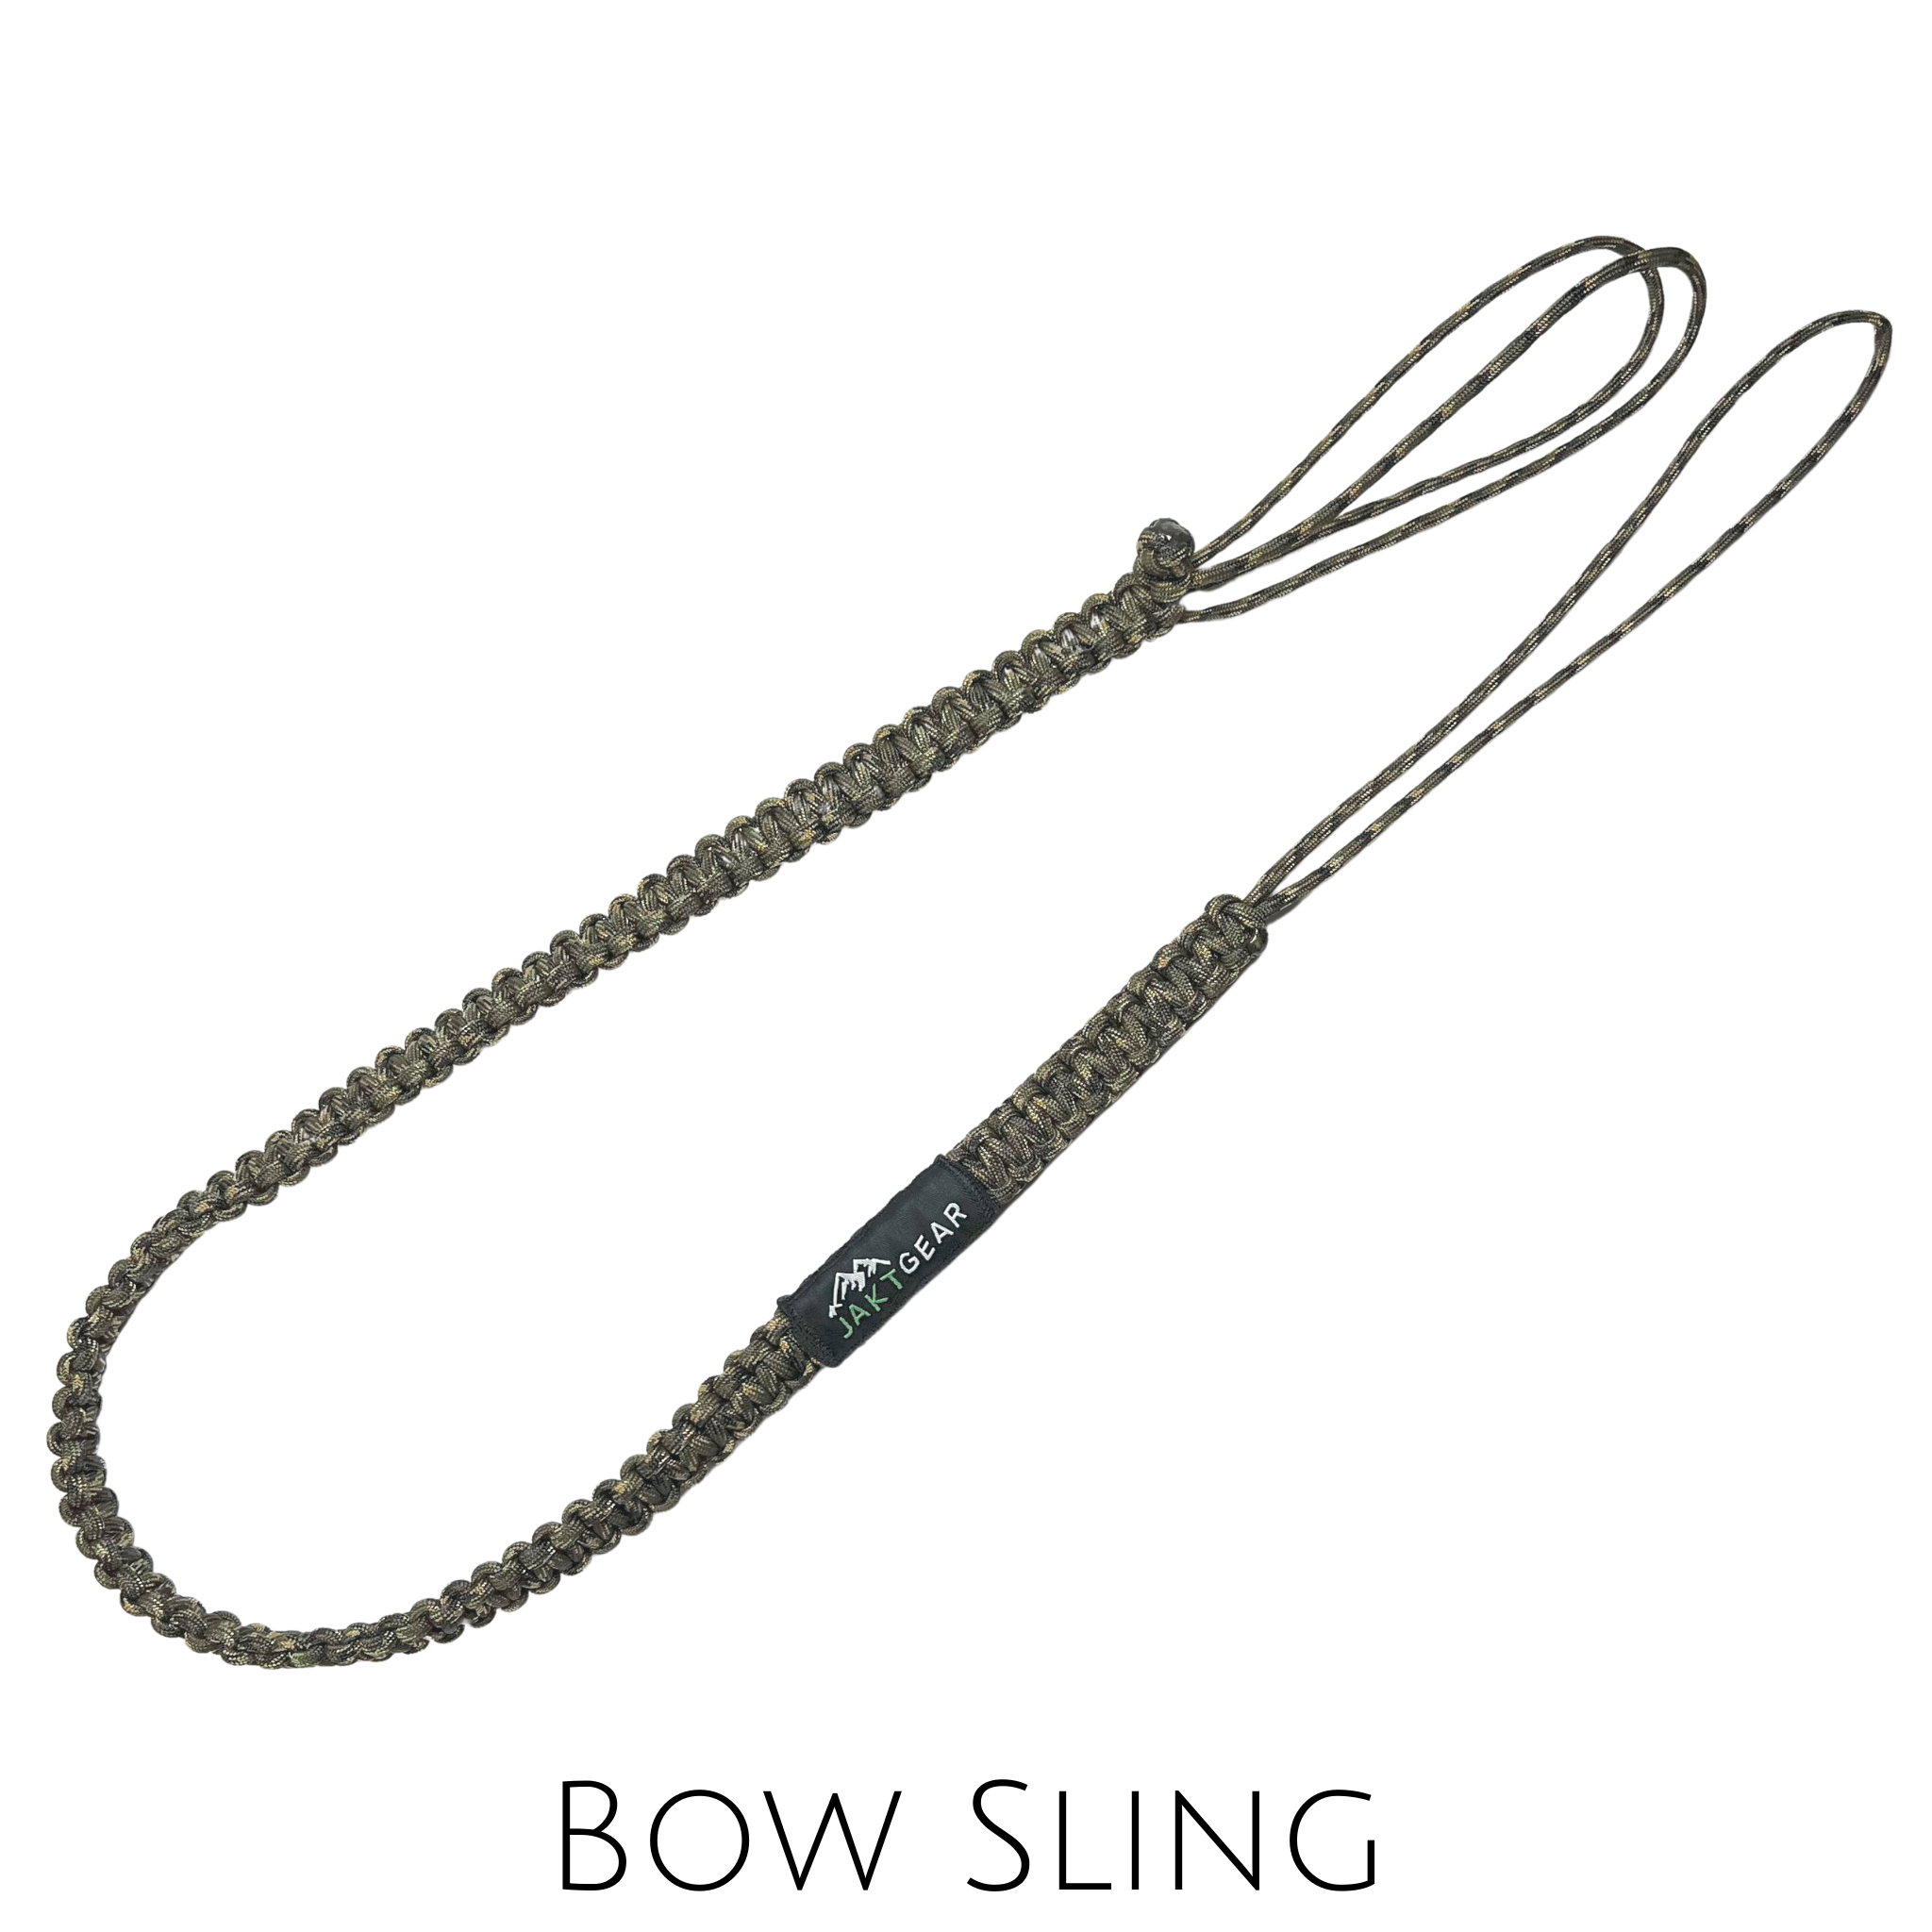 Pull Rope or Bow Sling?